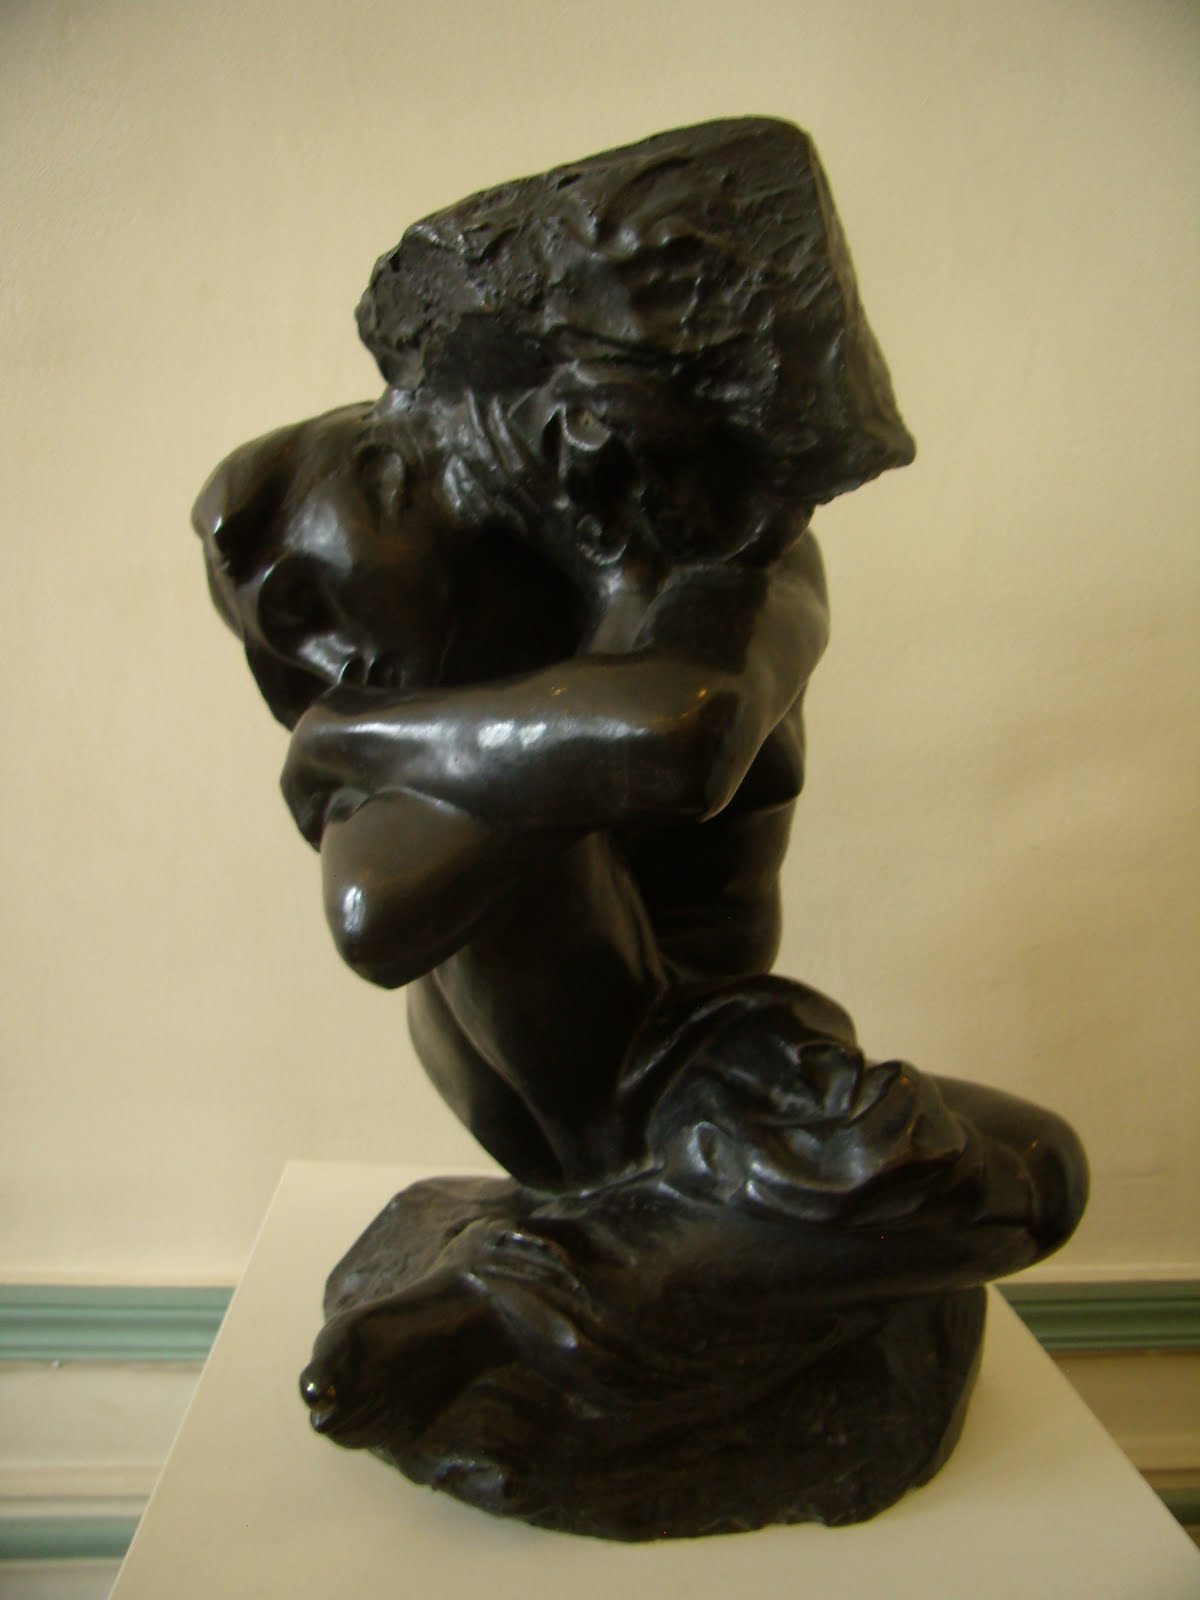 A Taste Of Parisian Life: Rodin and Rodents